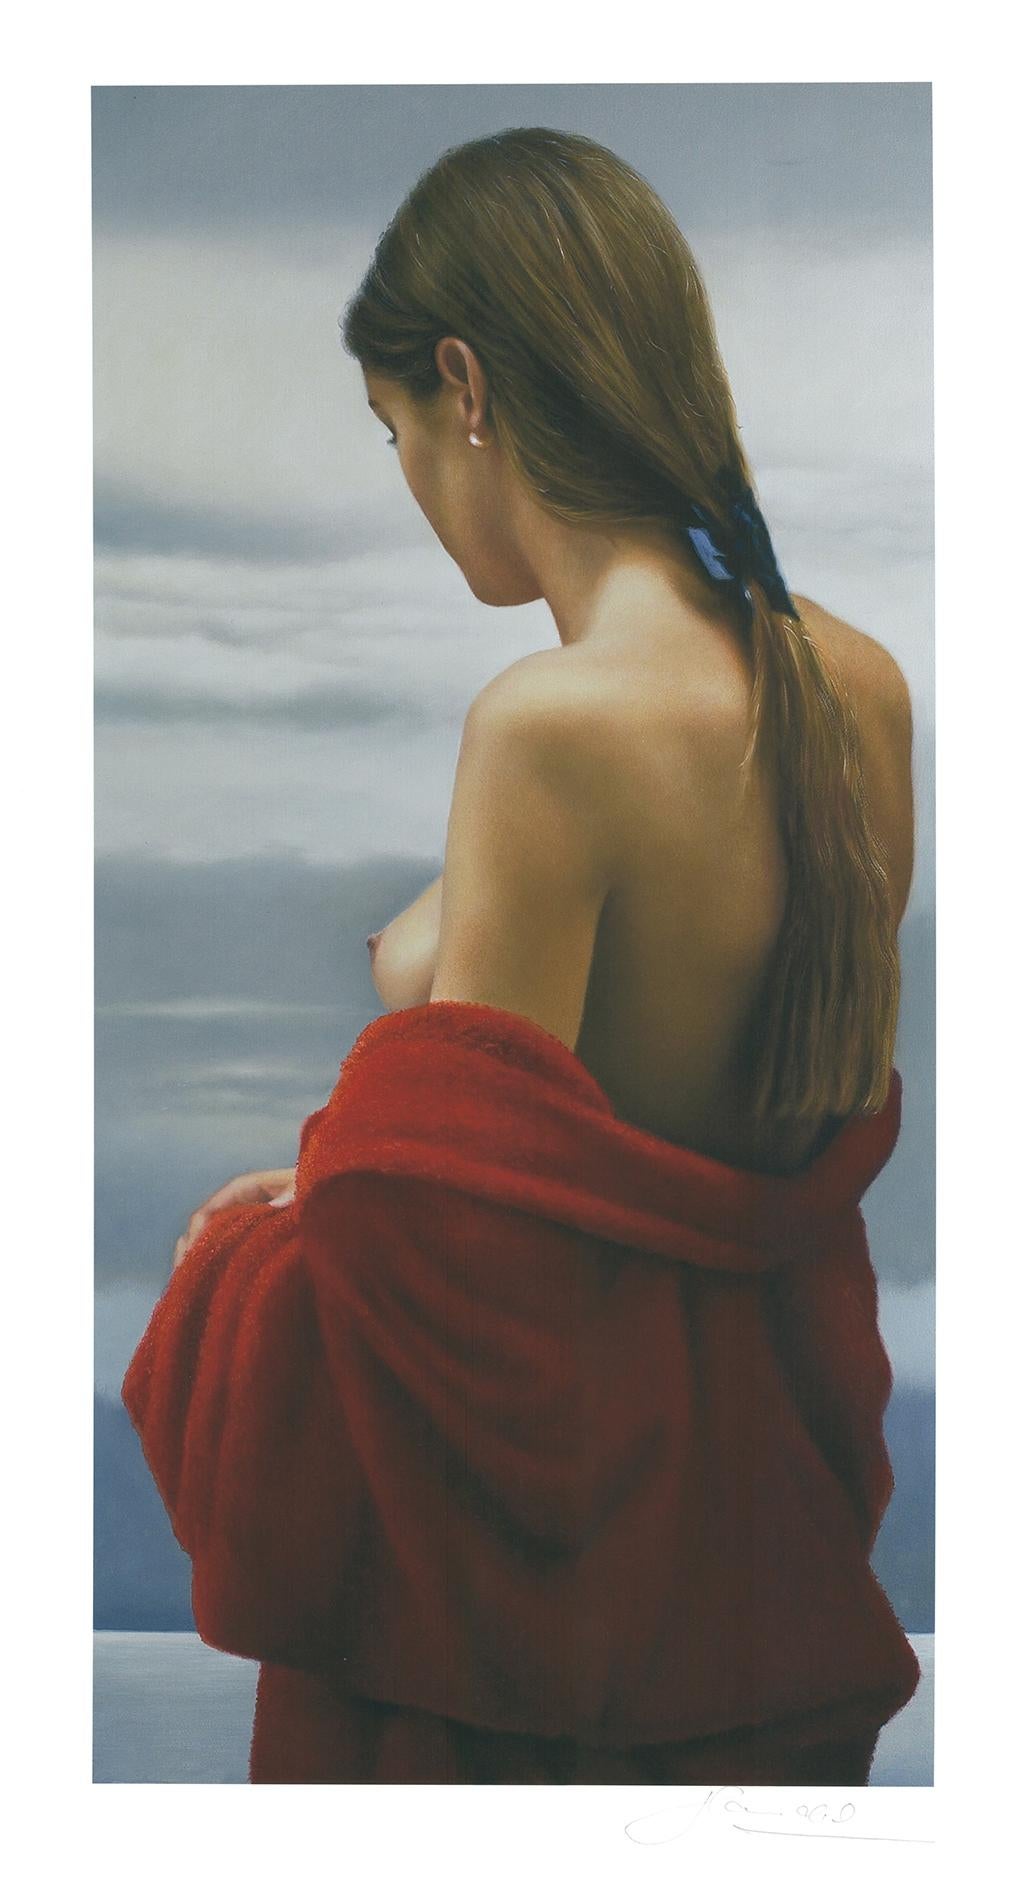 Peter Handel - "Vera 2".

Giclée on Hahnemühle Velvet, handsigned. 

High-quality art print after the original painting: Peter Handel transforms nude photographs painterly into highly realistic, subjective images.

Light and shadow, plasticity and